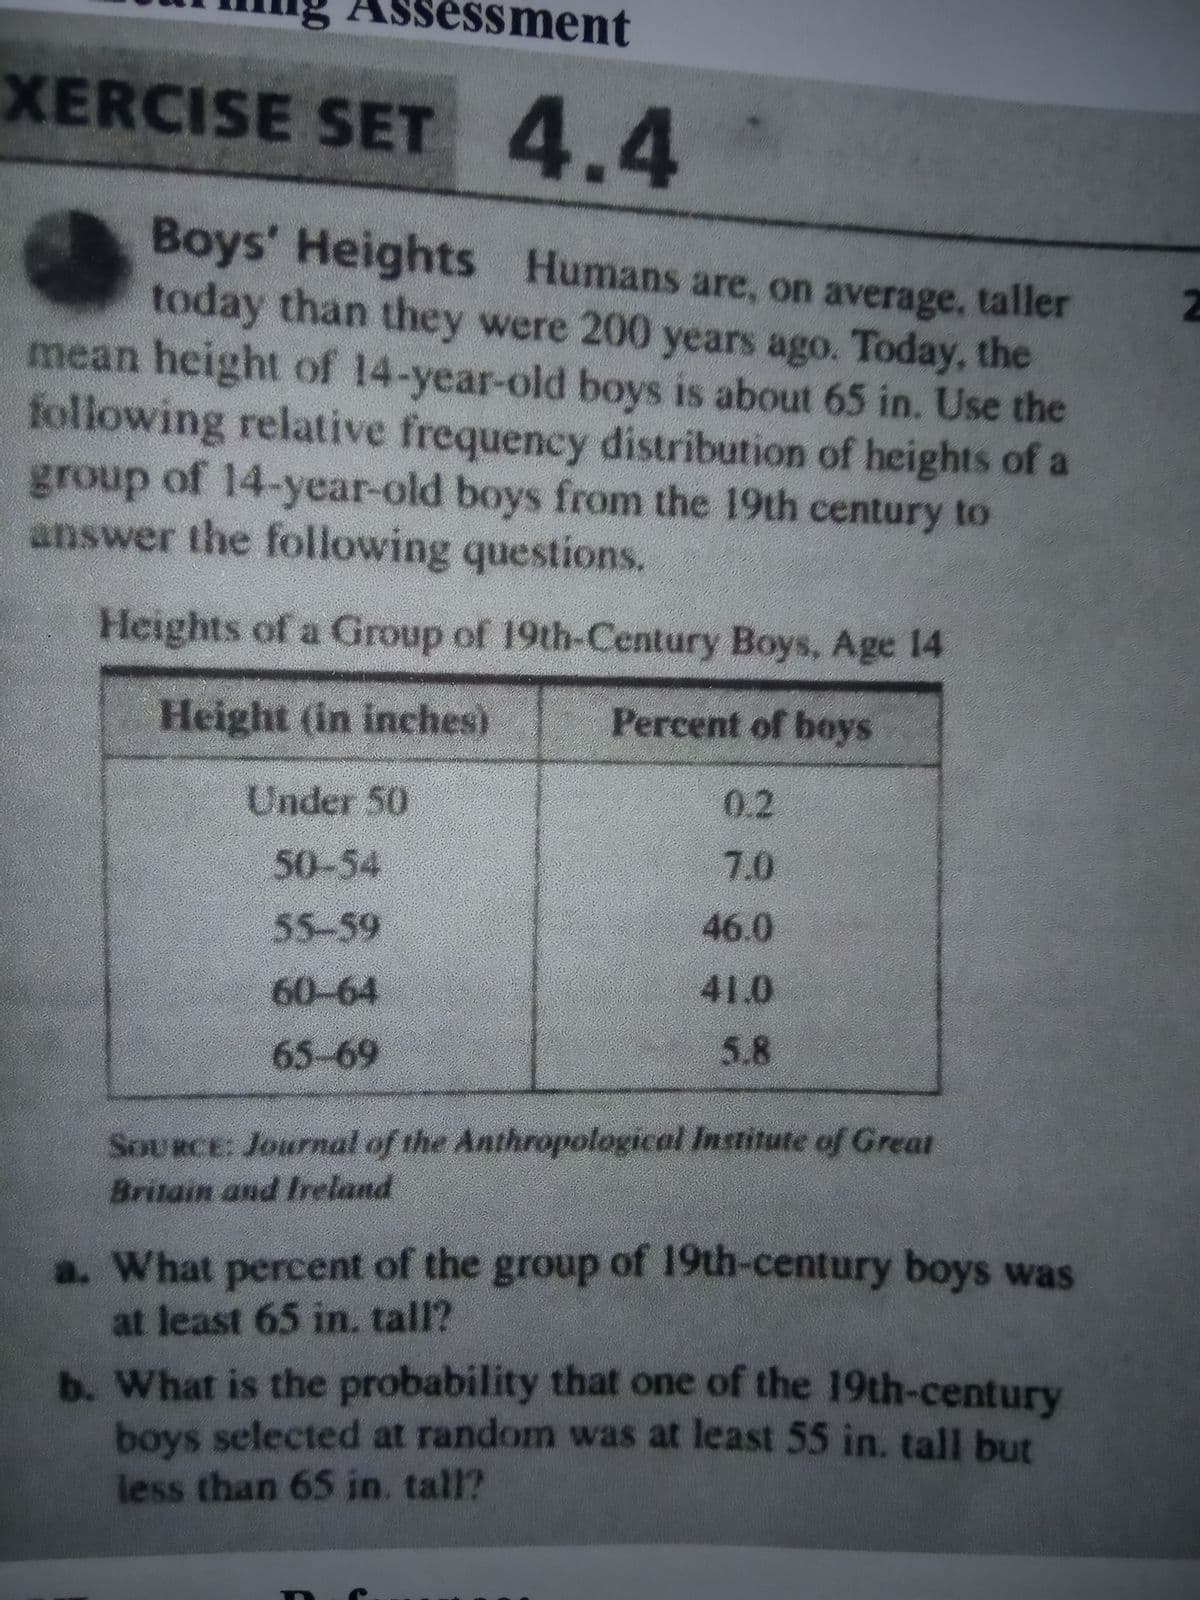 sessment
XERCISE SET
4.4
Boys' Heights Humans are, on average, taller
today than they were 200 years ago. Today, the
mean height of 14-year-old boys is about 65 in. Use the
following relative frequency distribution of heights of a
group of 14-year-old boys from the 19th century to
answer the following questions.
Heights of a Group of 19th-Century Boys, Age 14
Height (in inches)
Percent of boys
Under 50
0.2
50-54
7.0
55-59
46.0
60-64
41.0
65-69
5.8
SOURCE: Journal of the Anthropological Institute of Great
Britain and Ireland
a. What percent of the group of 19th-century boys was
at least 65 in, tall?
b. What is the probability that one of the 19th-century
boys selected at random was at least 55 in. tall but
less than 65 in. tall?
